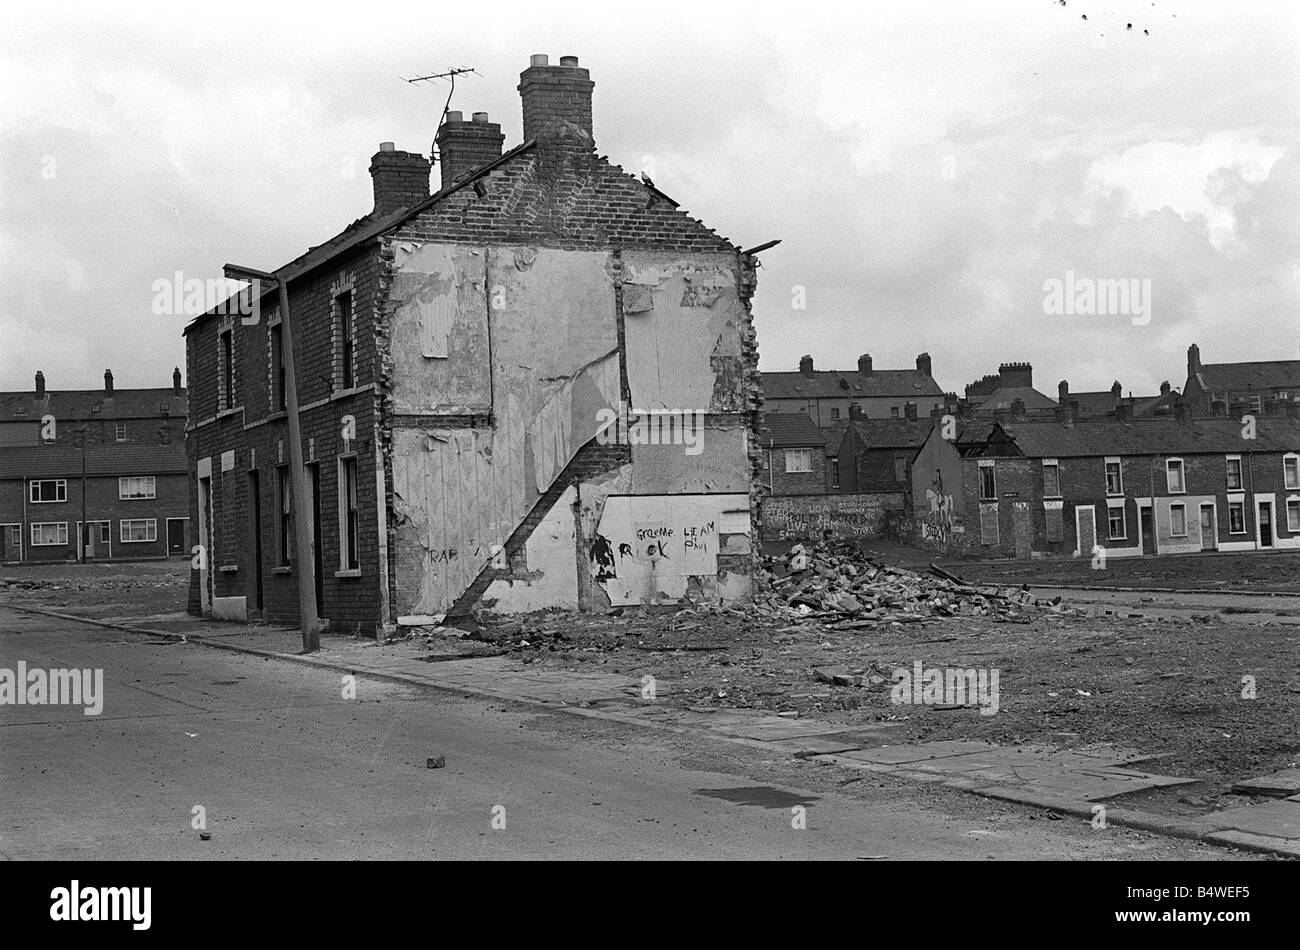 Residents Claim Of Housing Executive Conspiracy April 1980 An isolated block of houses juts out from the derelict Tiger Bay landscape Residents of Belfast s Duncairn district claim a Housing Executive conspiracy is killing their area Mirrorpix Stock Photo